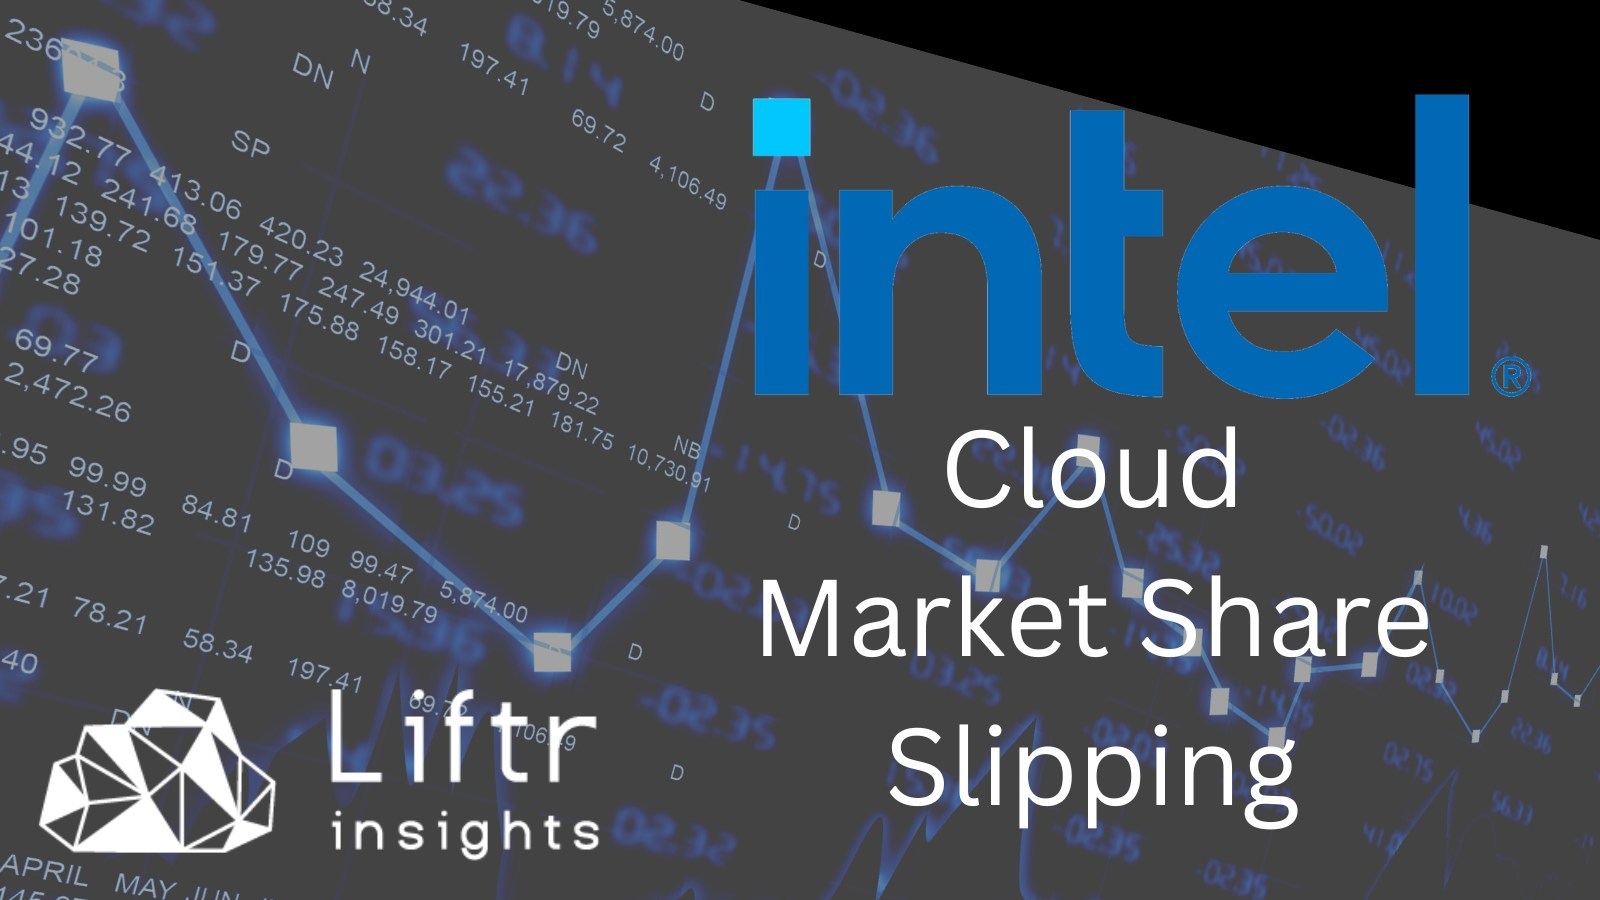 Intel cloud market share is slipping, as seen in Liftr Insights data